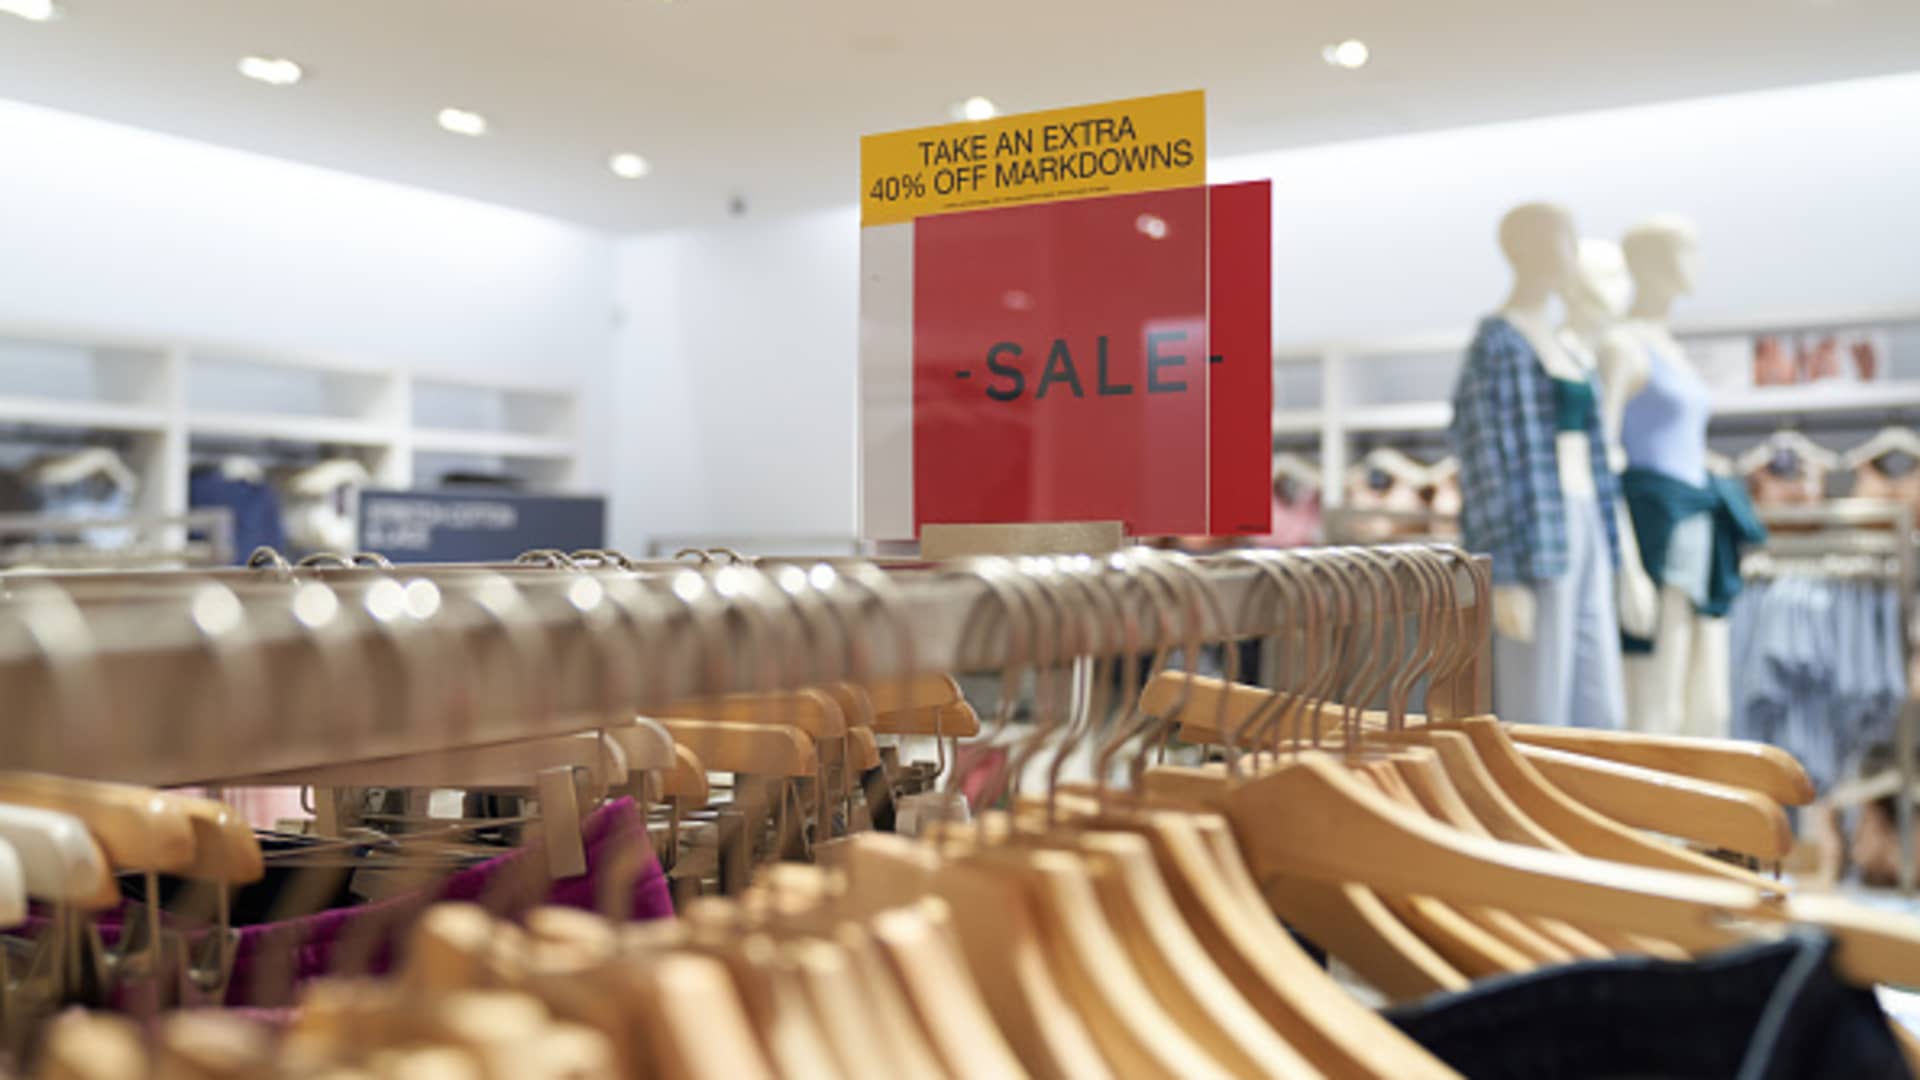 A clearance sale sign is seen at the Gap retail store on September 20, 2022 in Los Angeles, California.